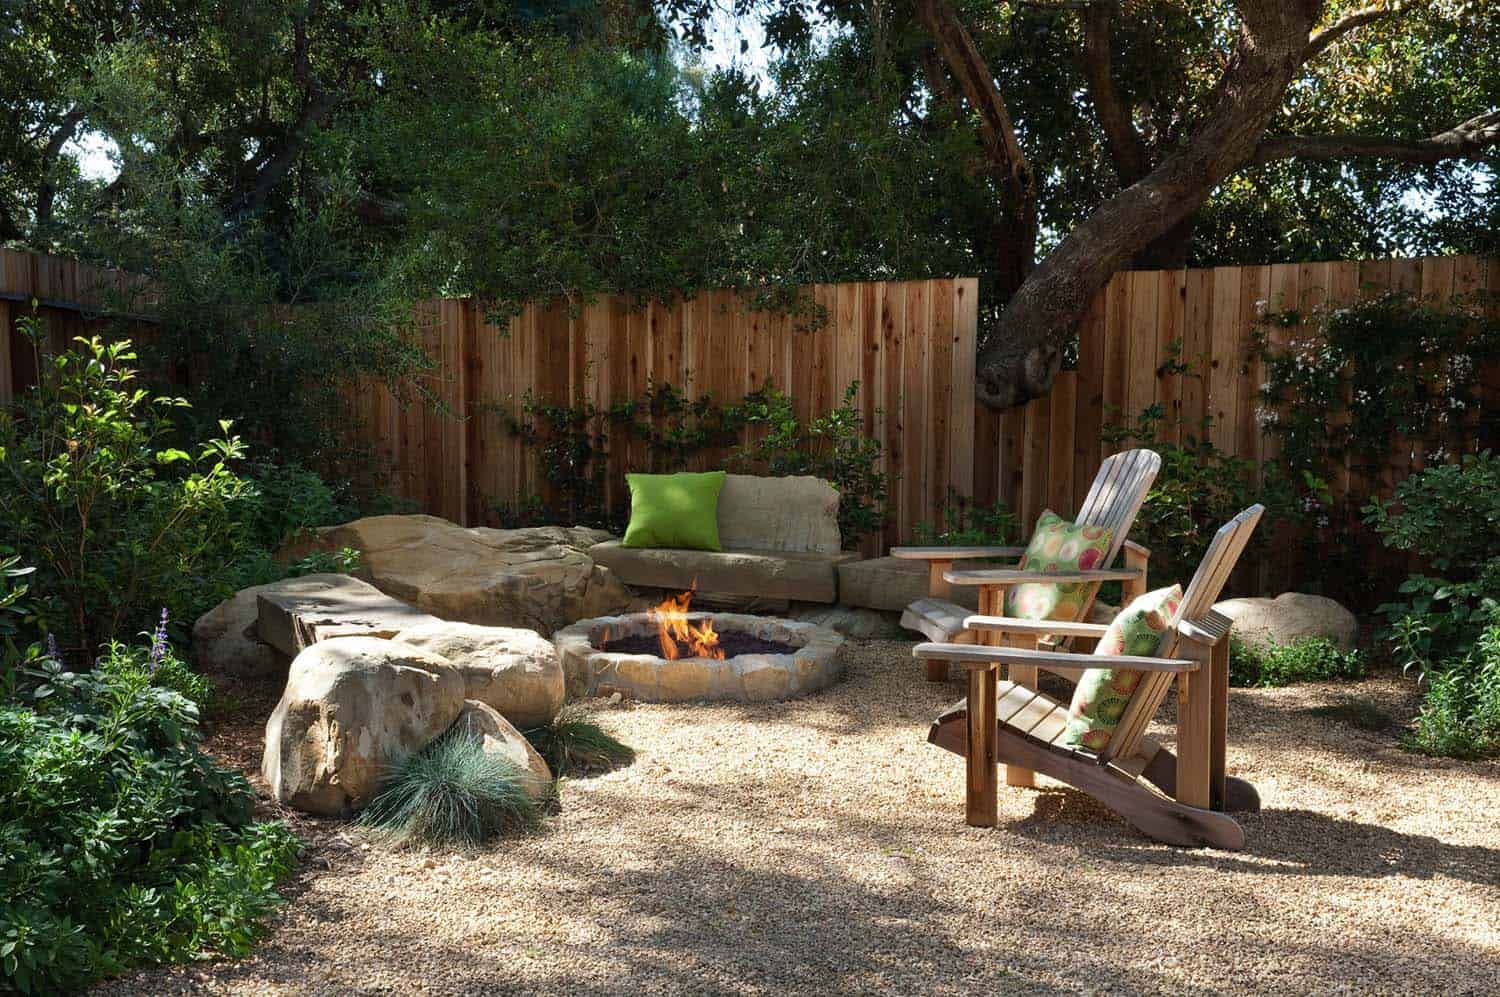 28 Inspiring Fire Pit Ideas To Create A Fabulous Backyard Oasis,Threes Company Apartment Location